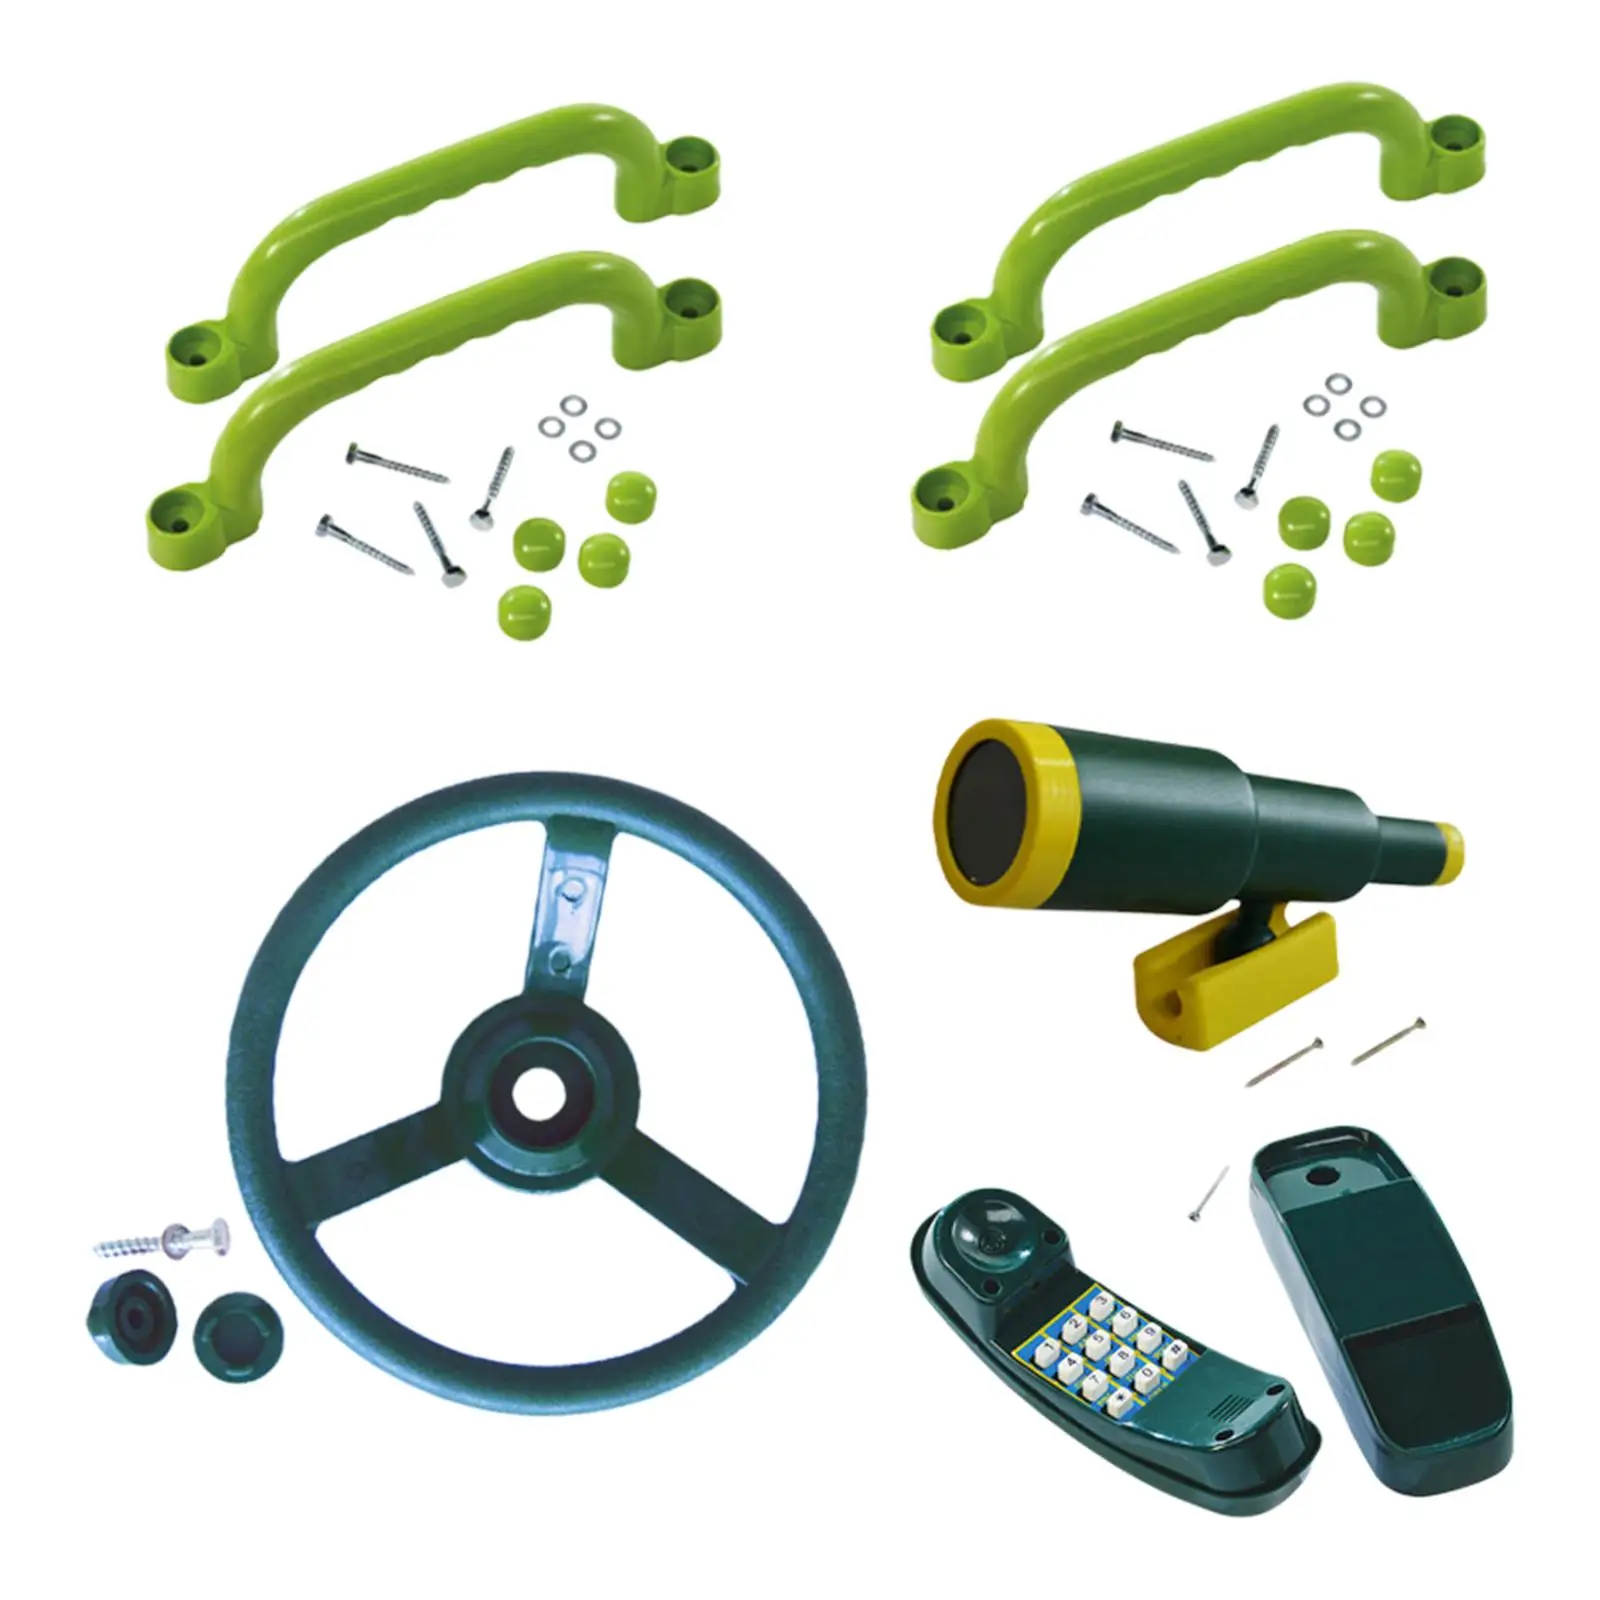 Playground Toy Set Grab Handle Pretend Toy with Screw Steering Wheel Toy for Outdoor